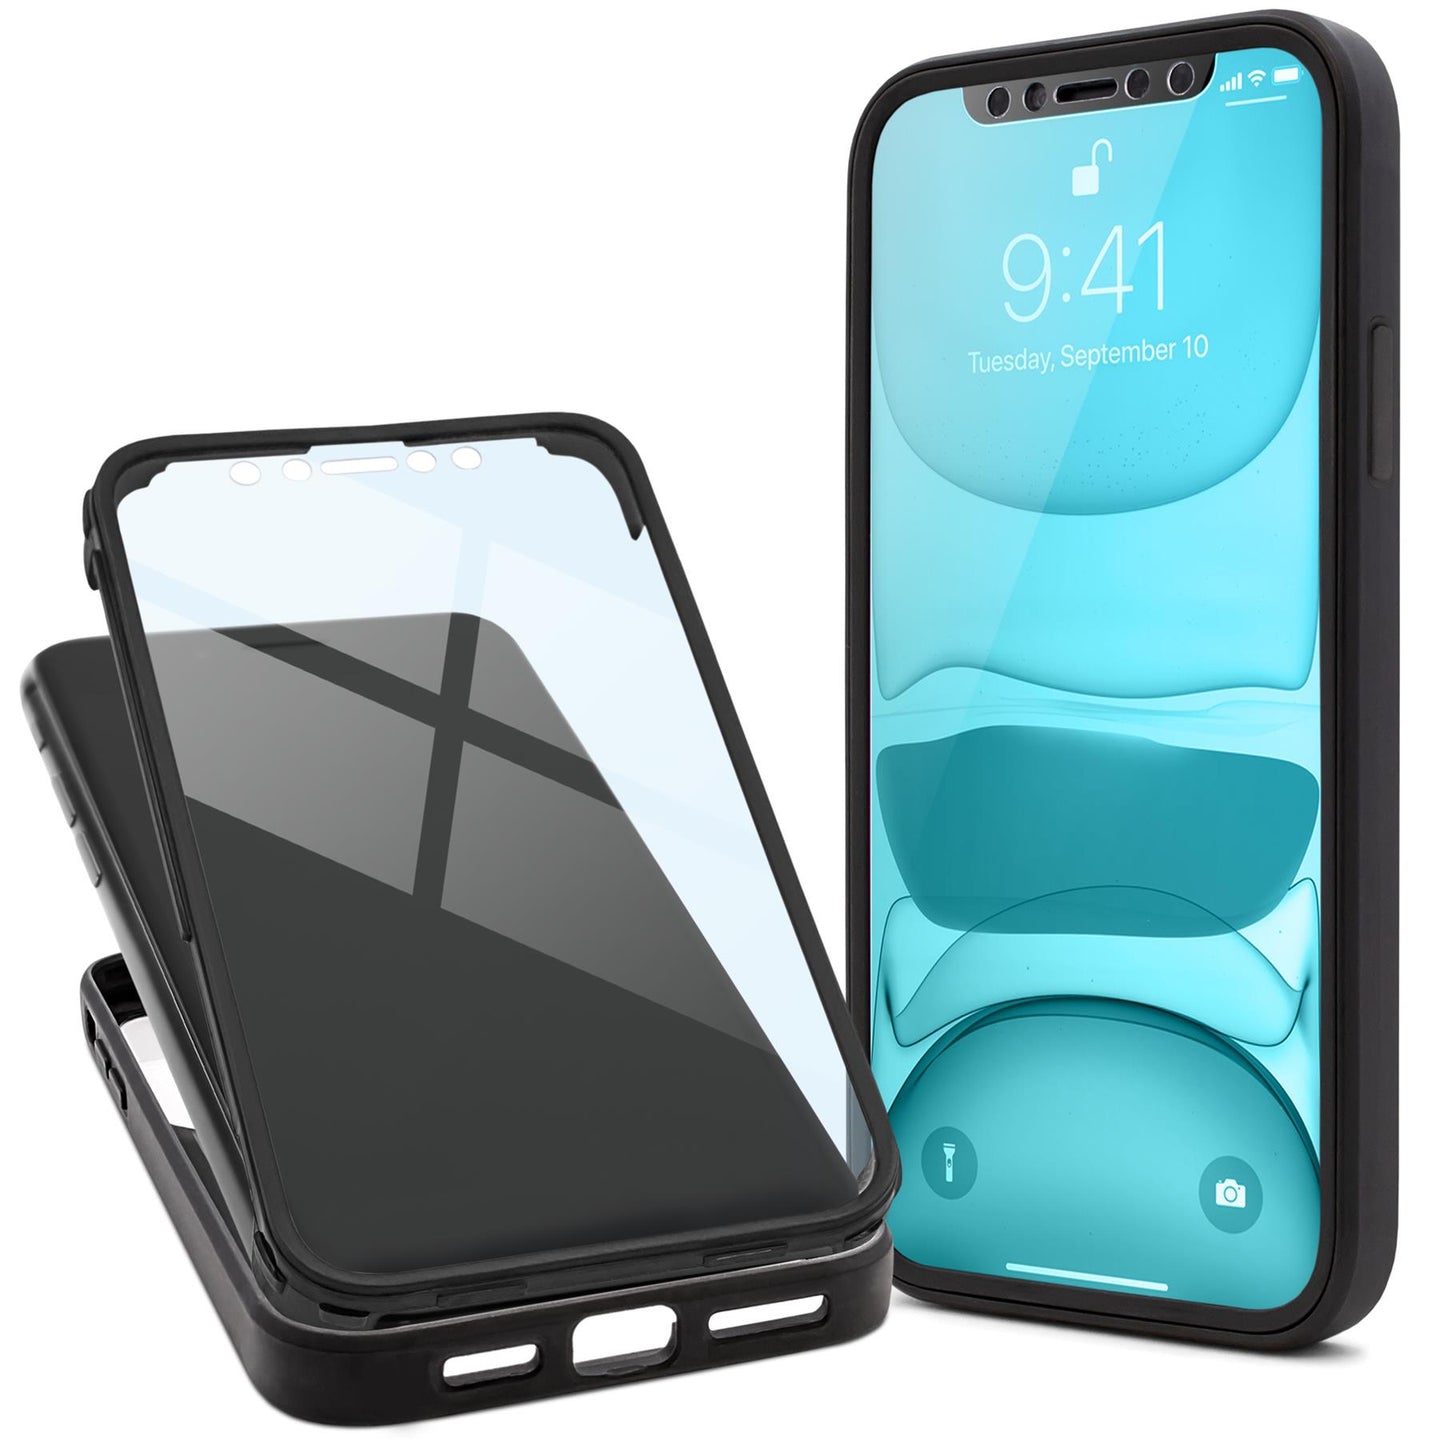 Moozy 360 Case for iPhone 12 / 12 Pro - Black Rim Transparent Case, Full Body Double-sided Protection, Cover with Built-in Screen Protector